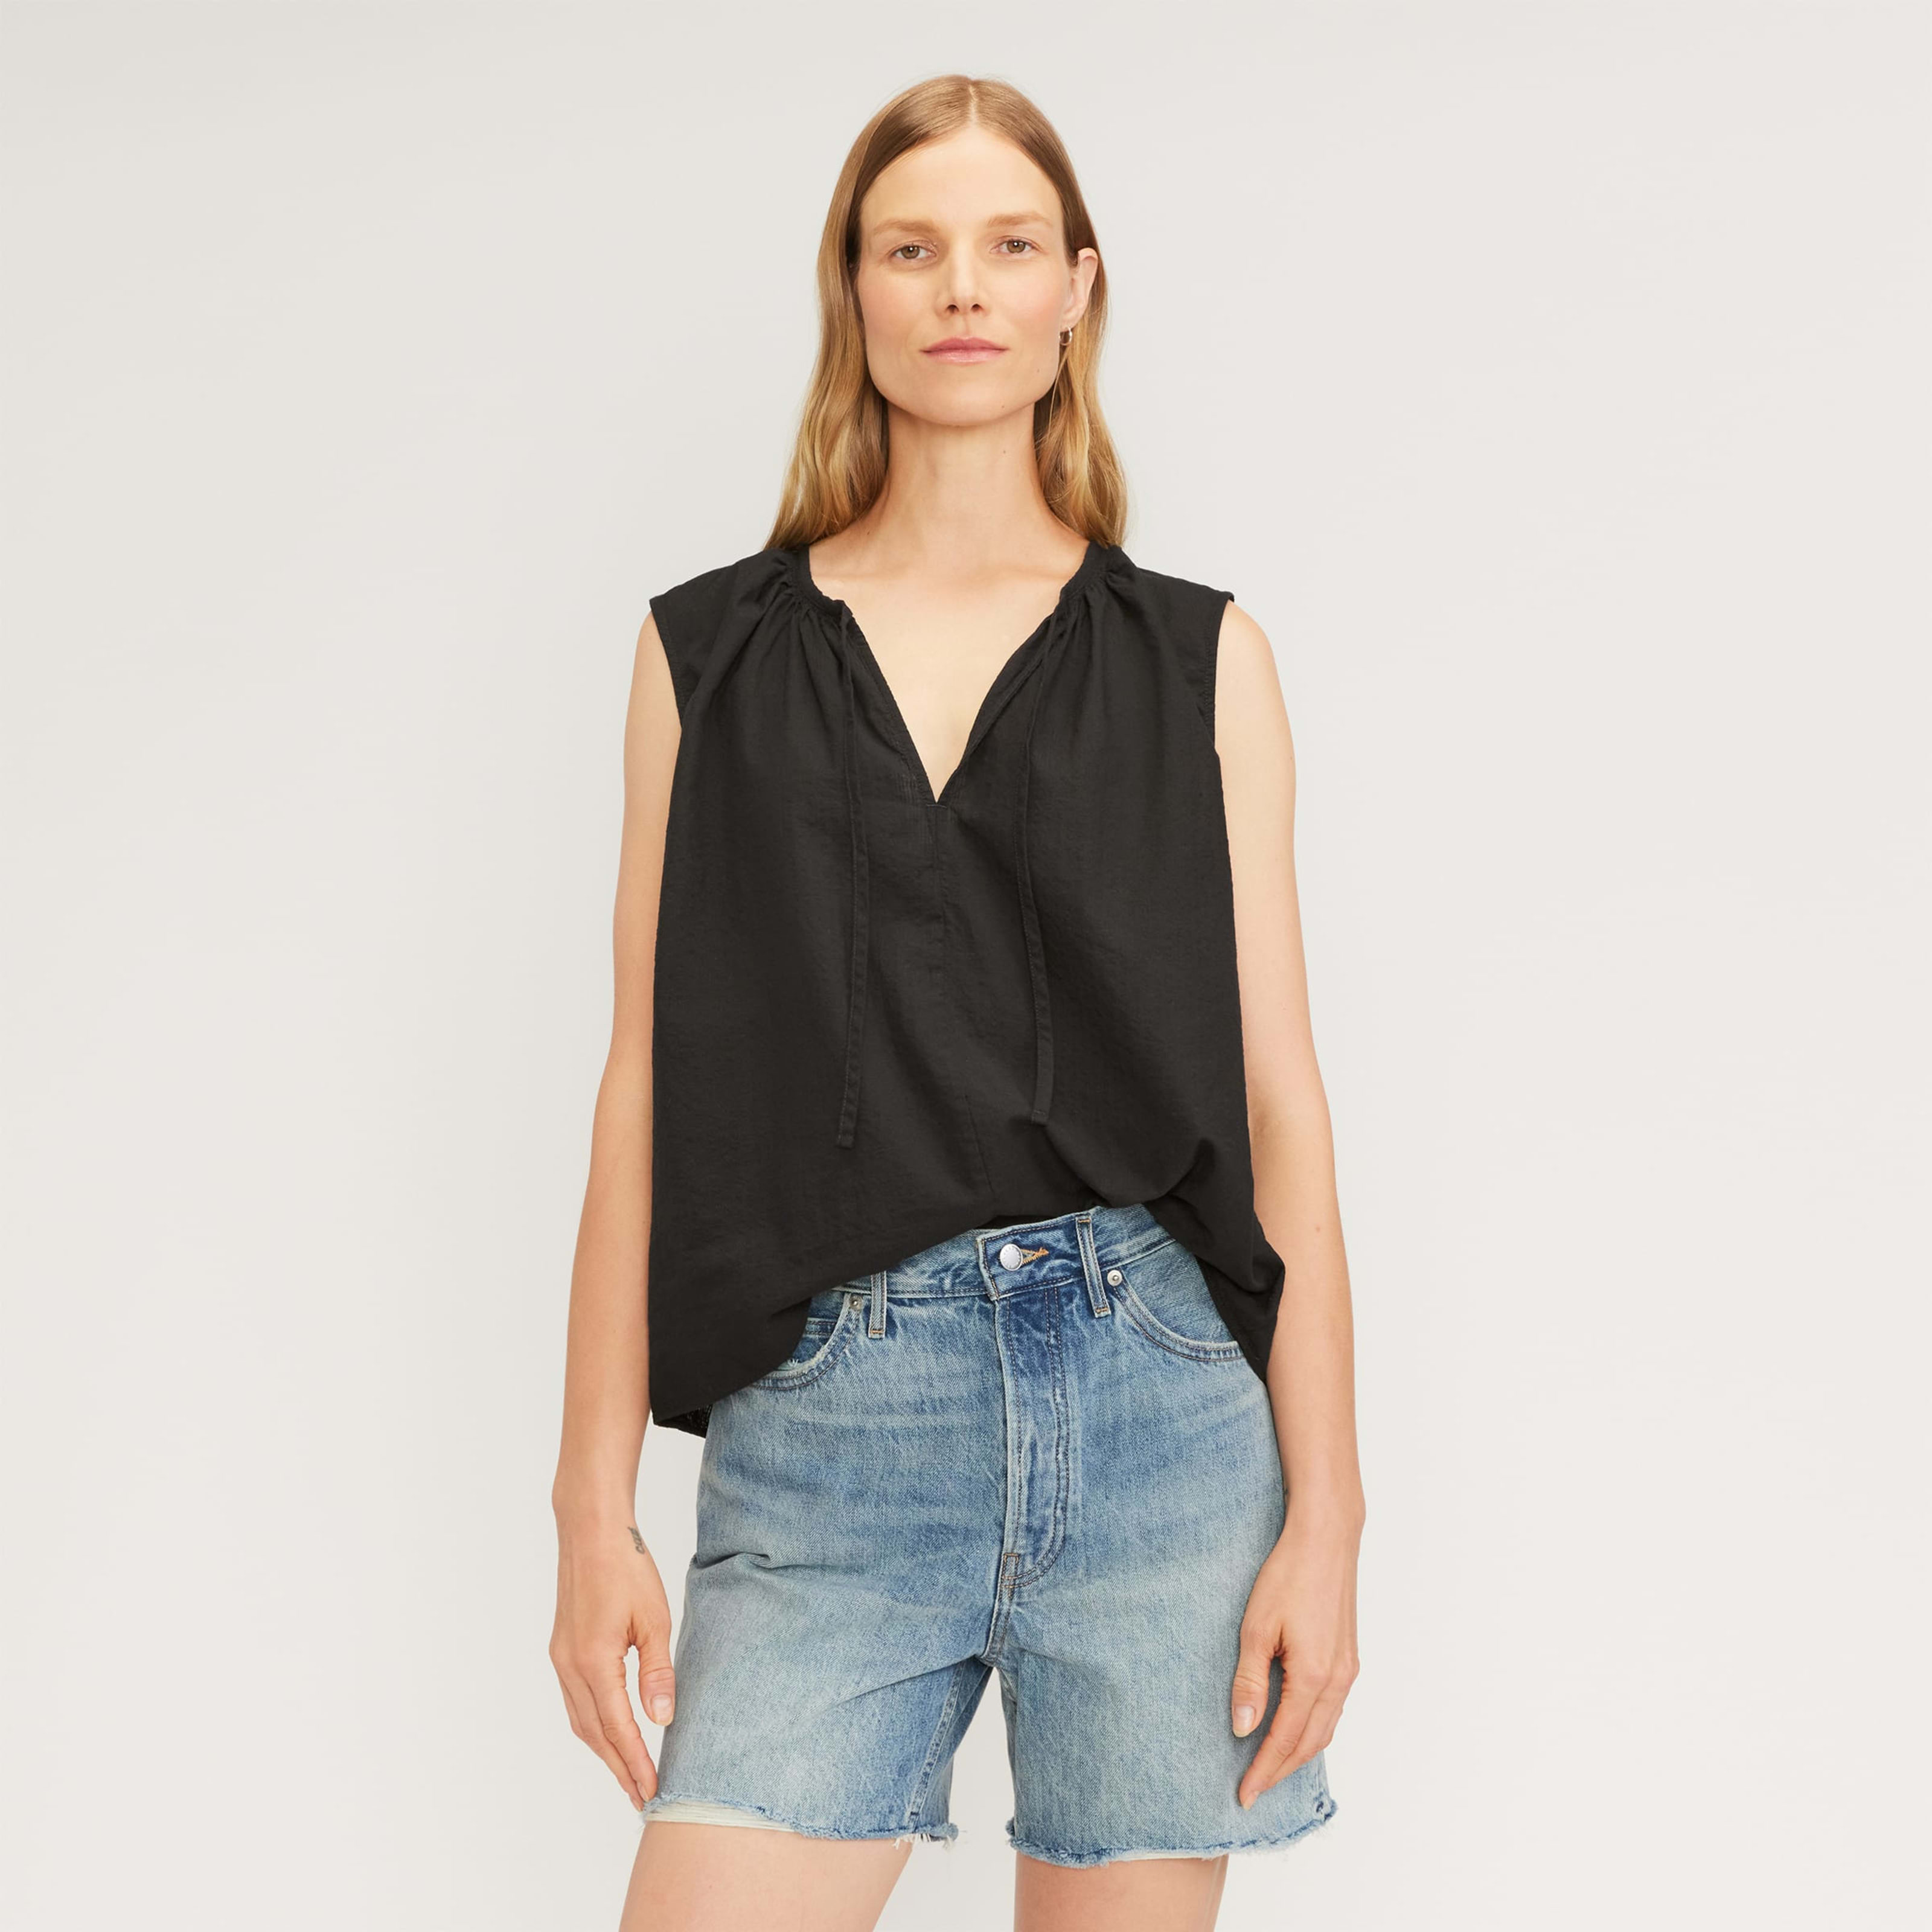 gathered tie-front top by everlane in black, size xxs